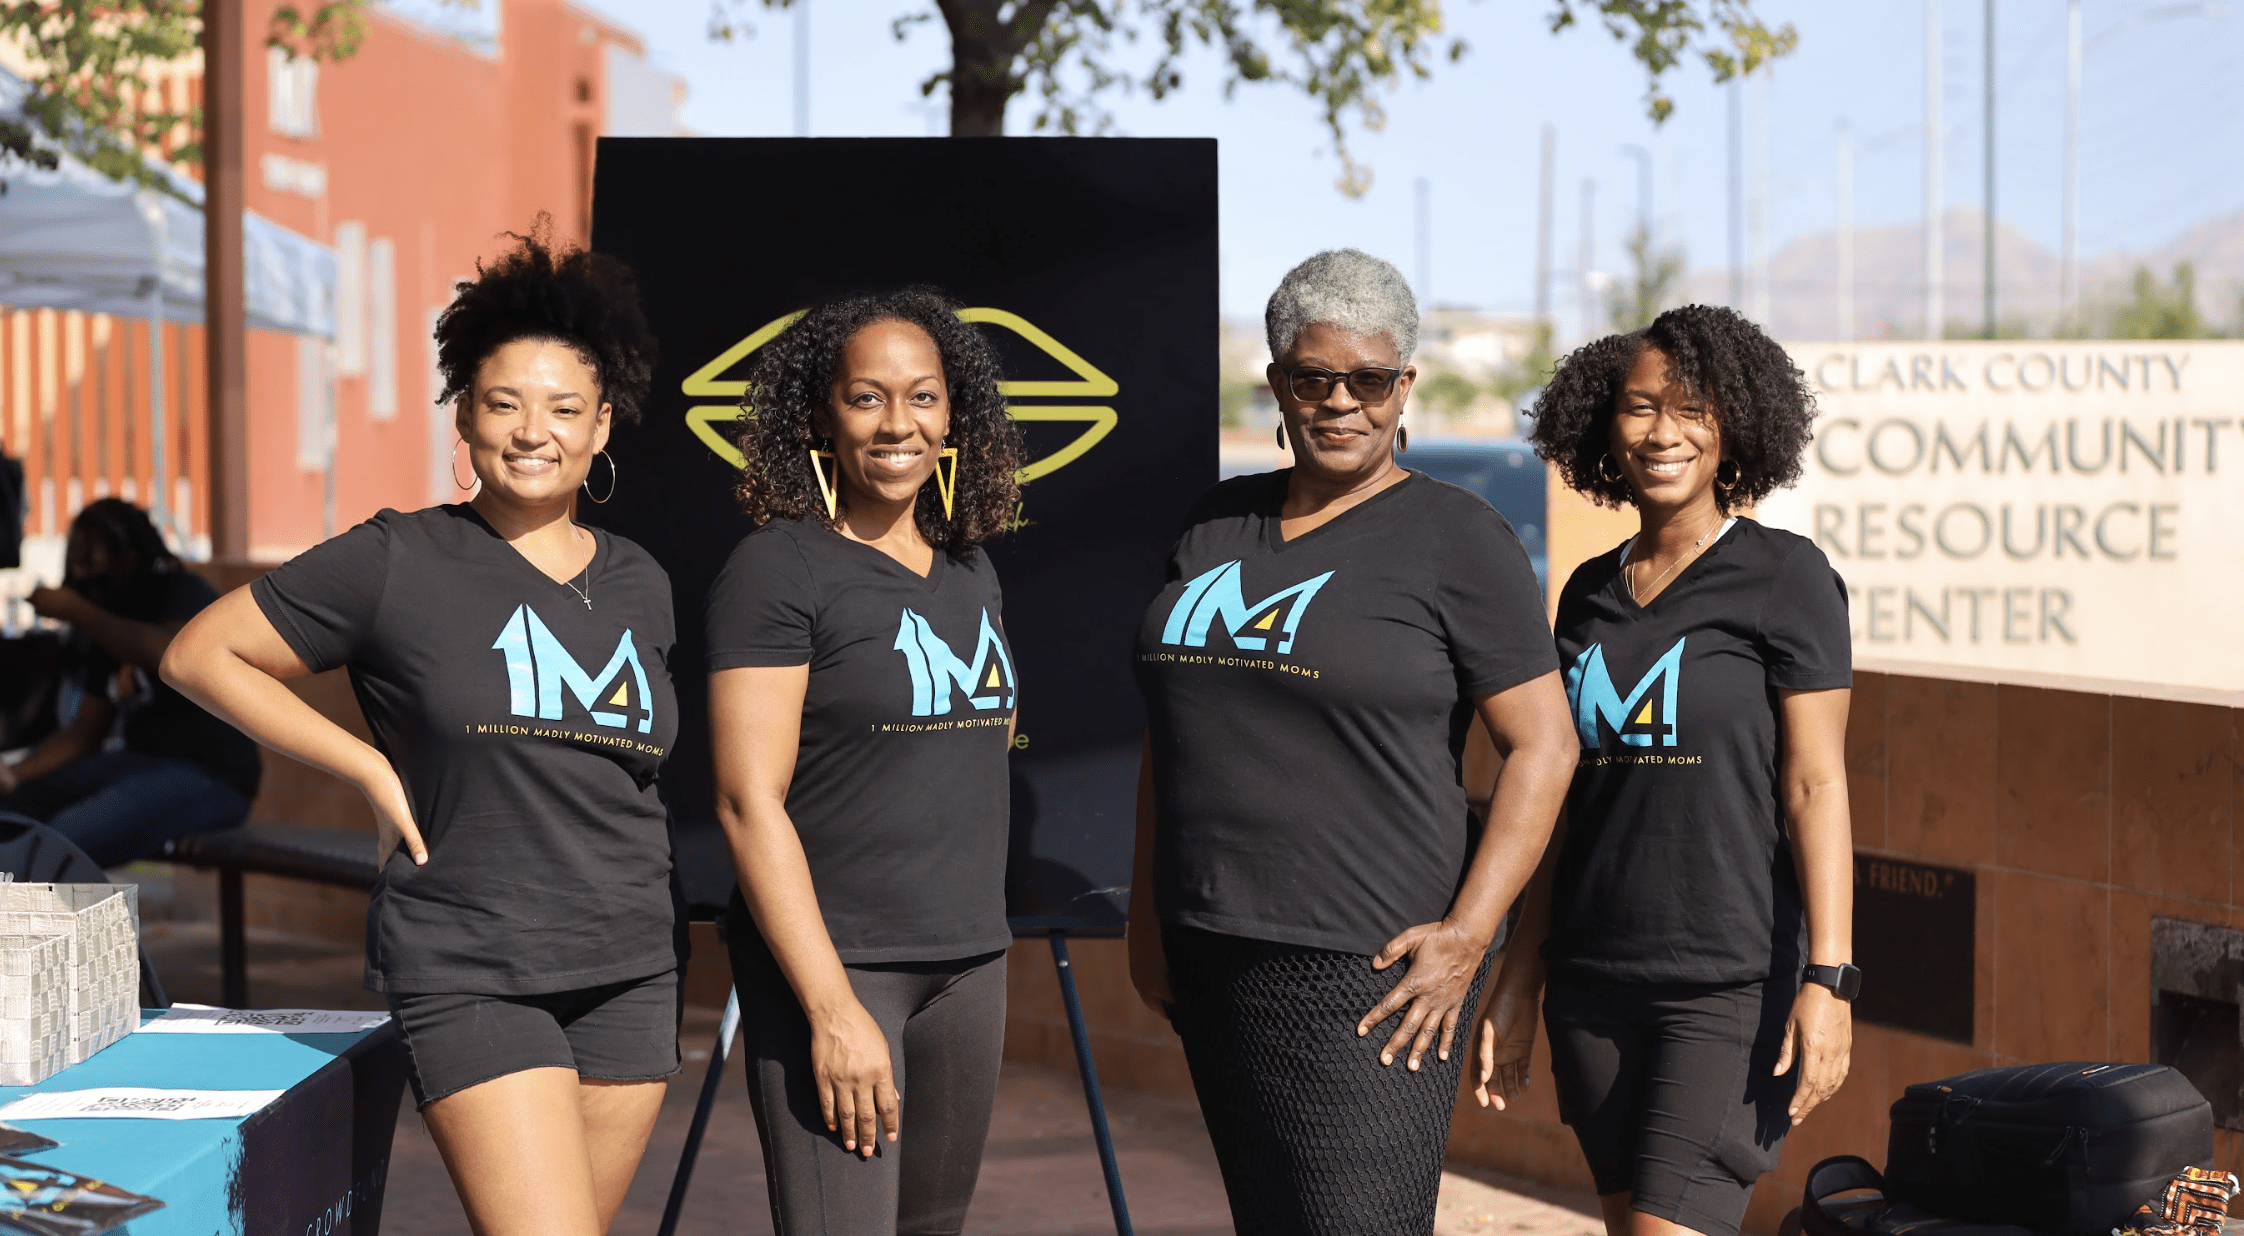 Group of Black women at a community event, dressed in black shirts featuring the blue '1M4' logo, with a red brick building and a black sign displaying a yellow logo in the background. Individuals are positioned behind a table with brochures.